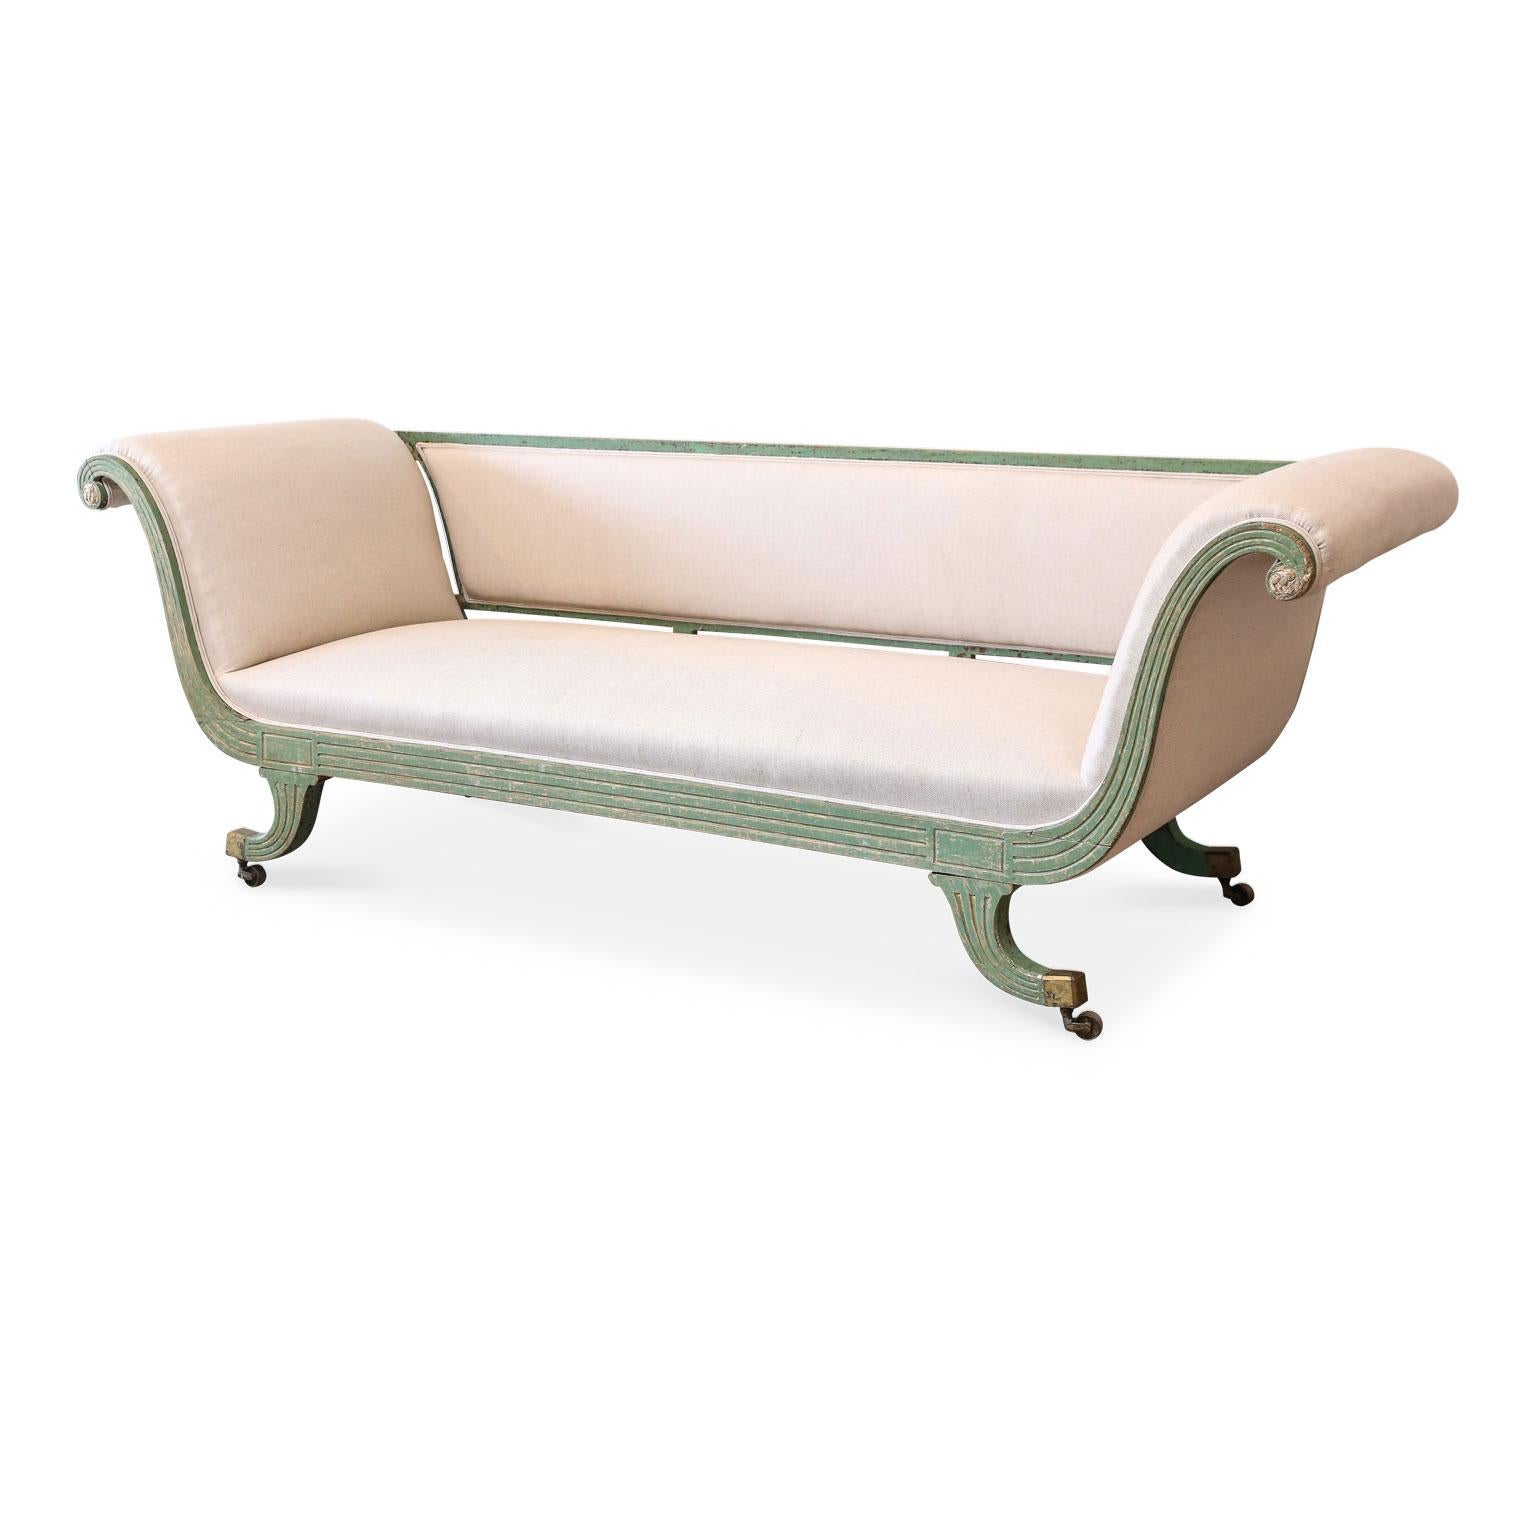 Regency scroll arm sofa constructed, circa 1820 for an English country estate. Stands upon out swept legs (supported by original gilt brass castors). Sofa is dry-scraped back to its original green paint with traces of gilt. Carved decorative